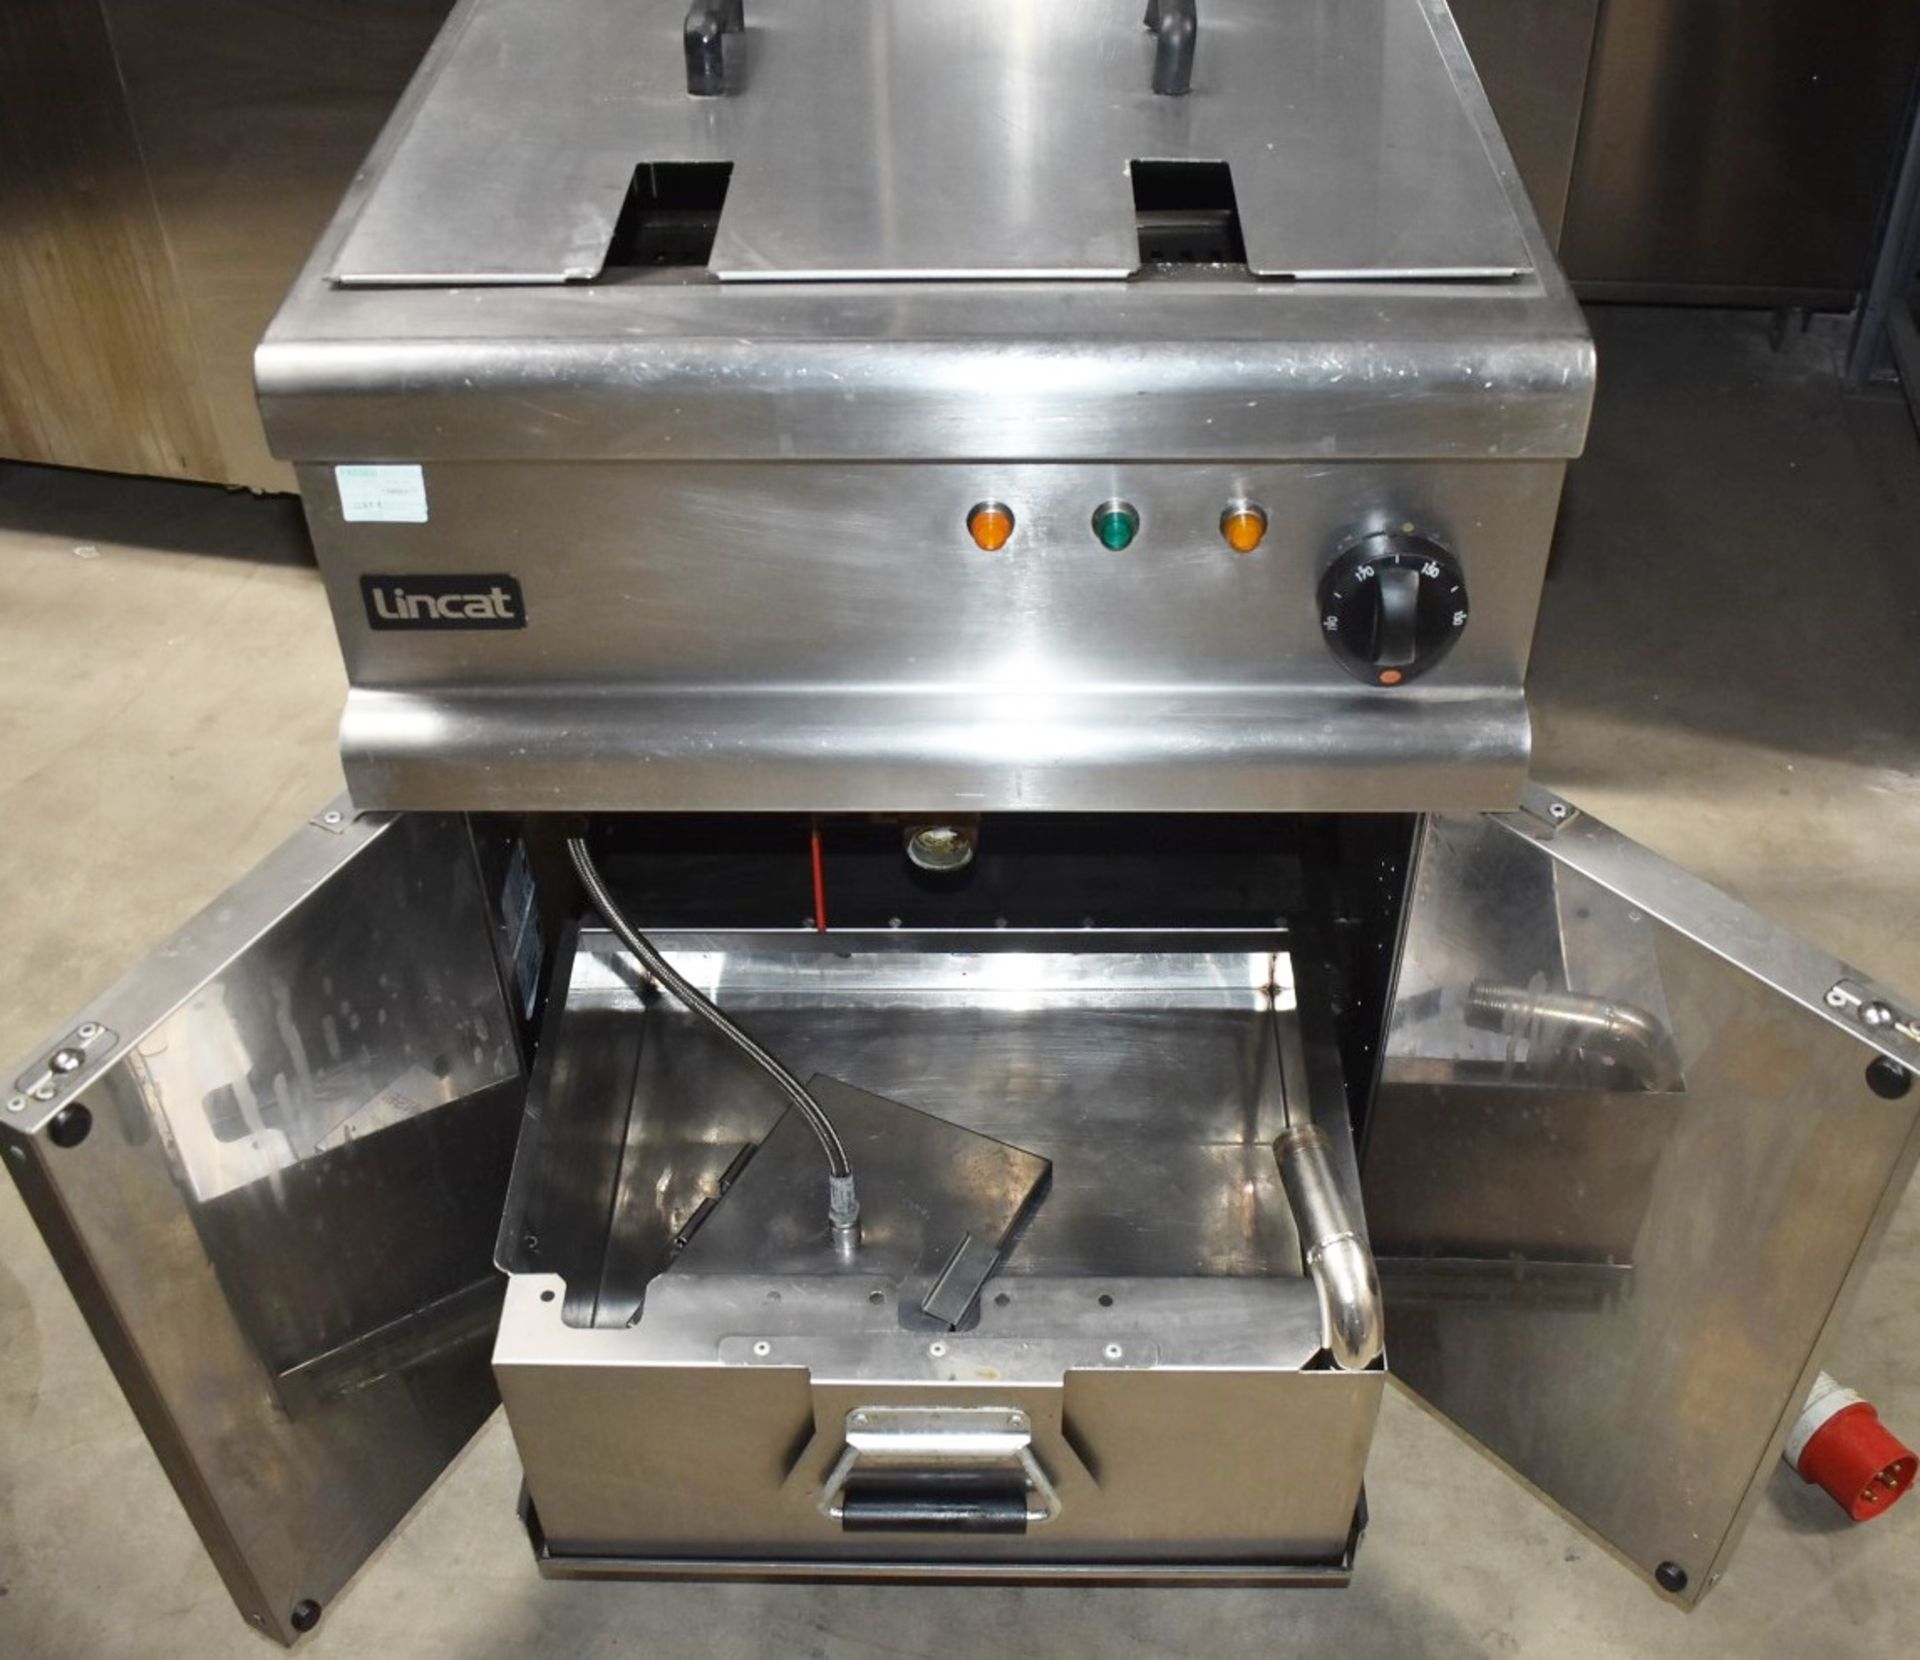 1 x Lincat Opus 700 Single Tank Electric Fryer With Built In Filtration - 3 Phase - Image 12 of 15